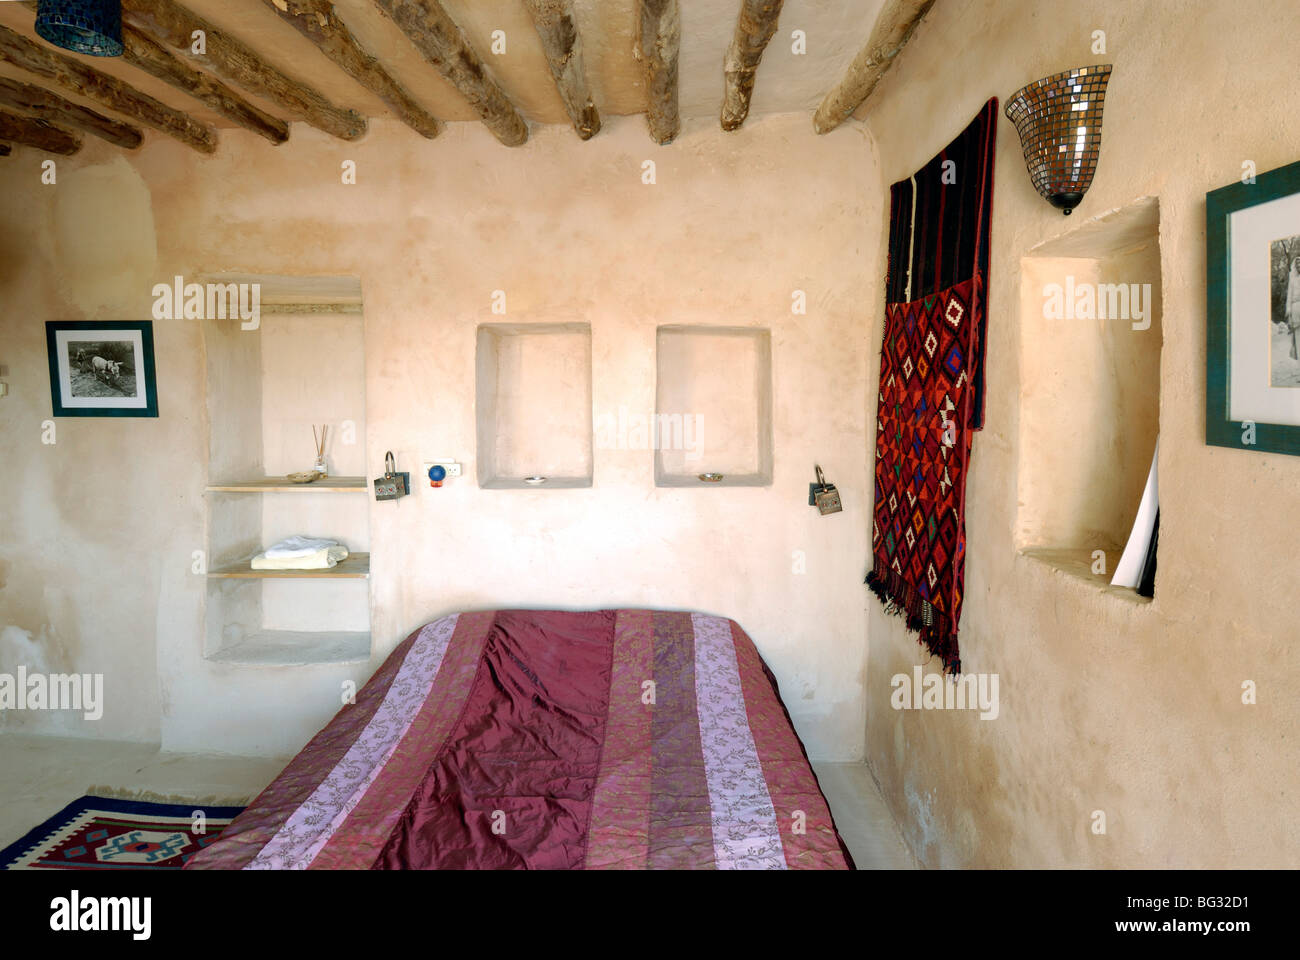 Israel, Negev, Shivta, Interior of a modern house built from local material using traditional building methods Stock Photo